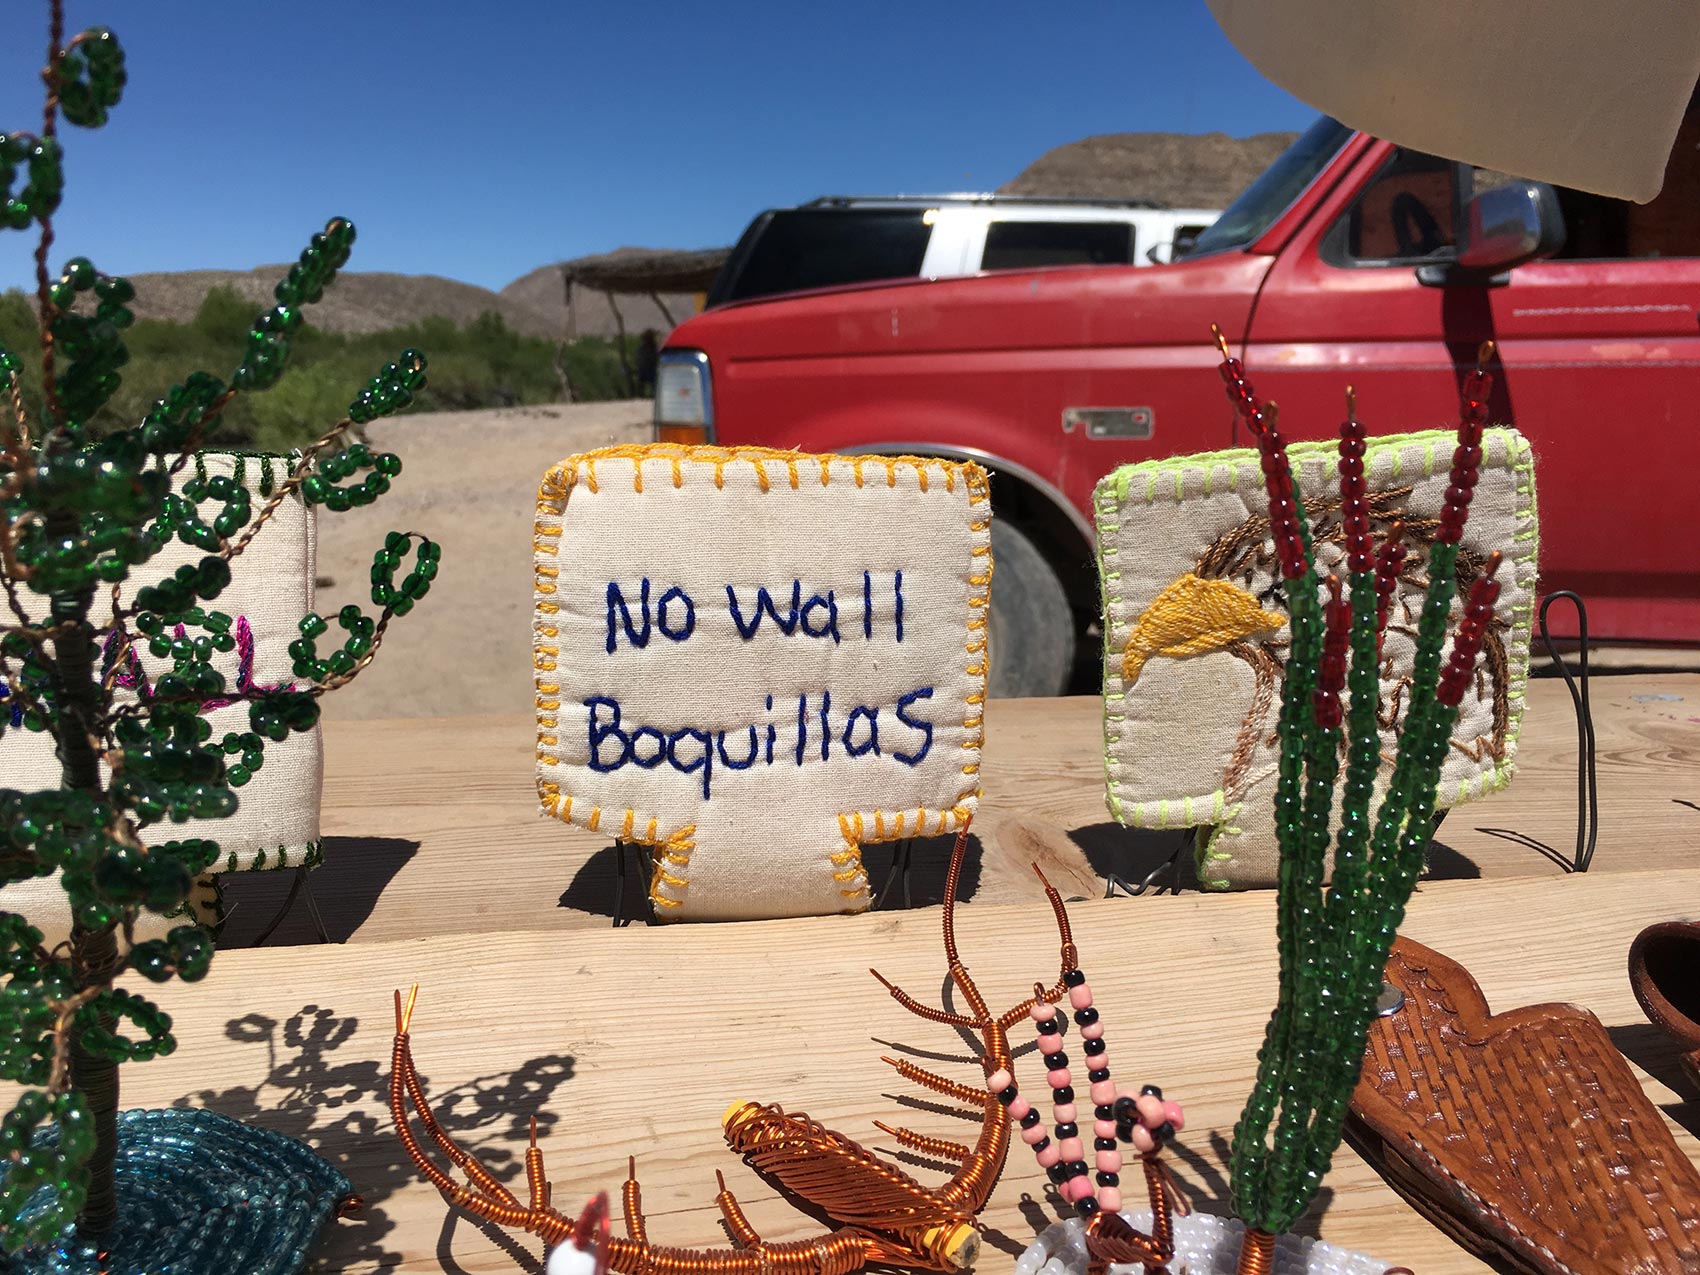 Stop the wall boquillas